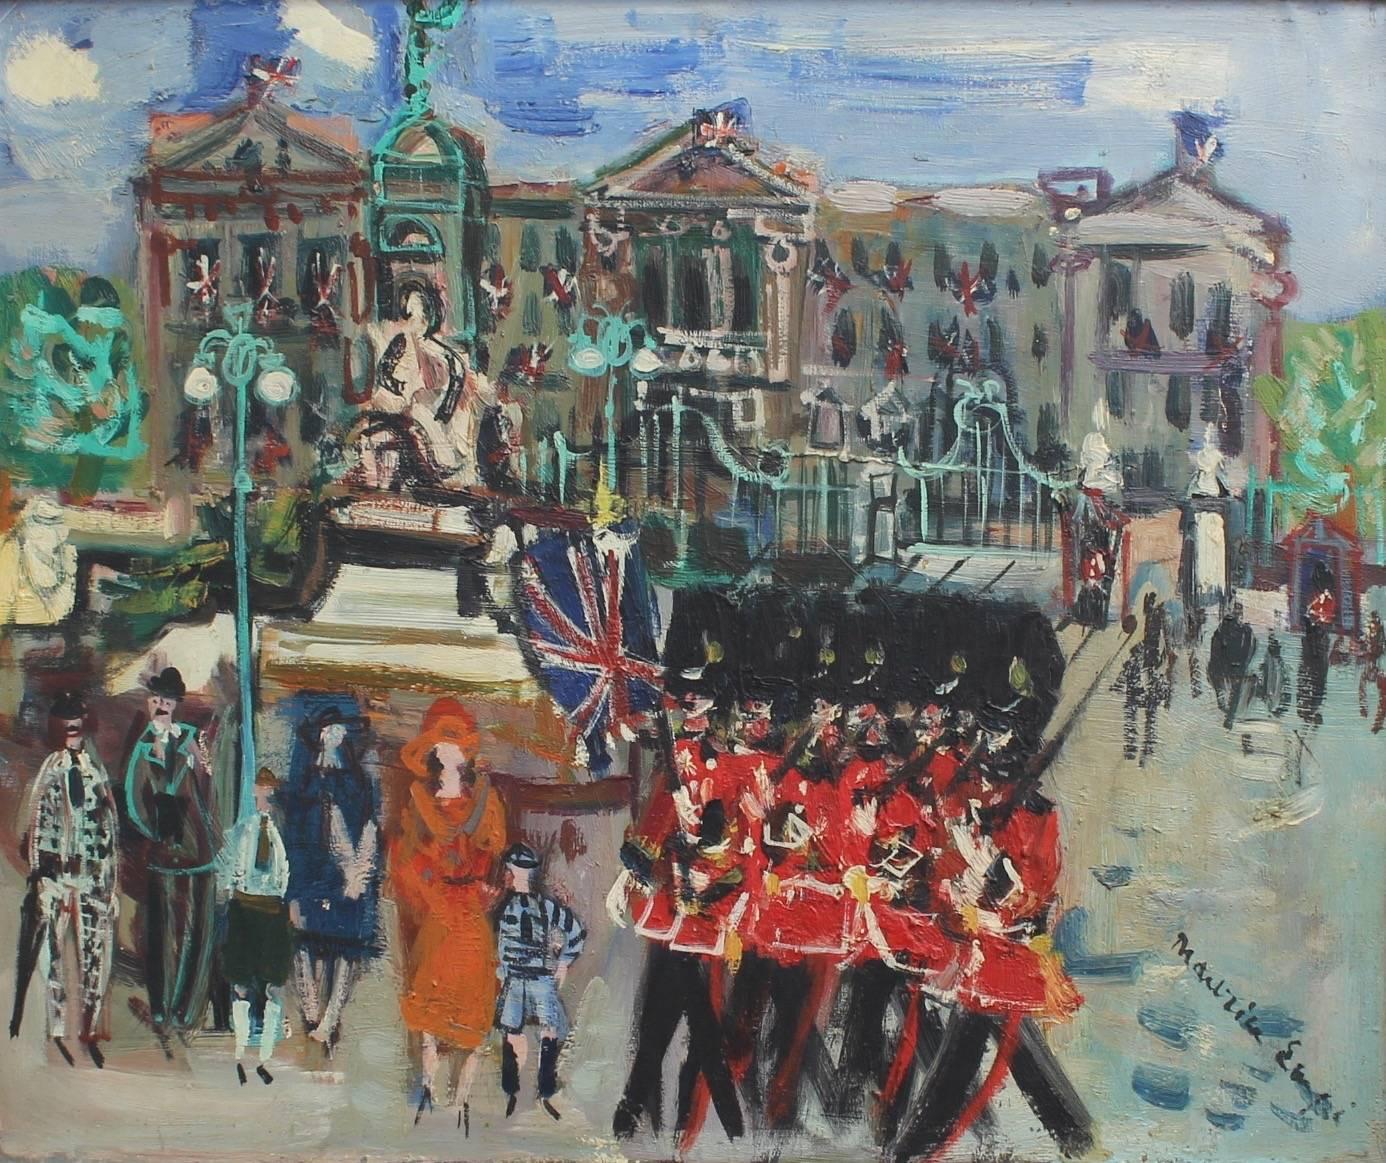 Maurice EMPI Figurative Painting - 'Changing of the Guard at Buckingham Palace' by Maurice Empi, London c. 1960s 